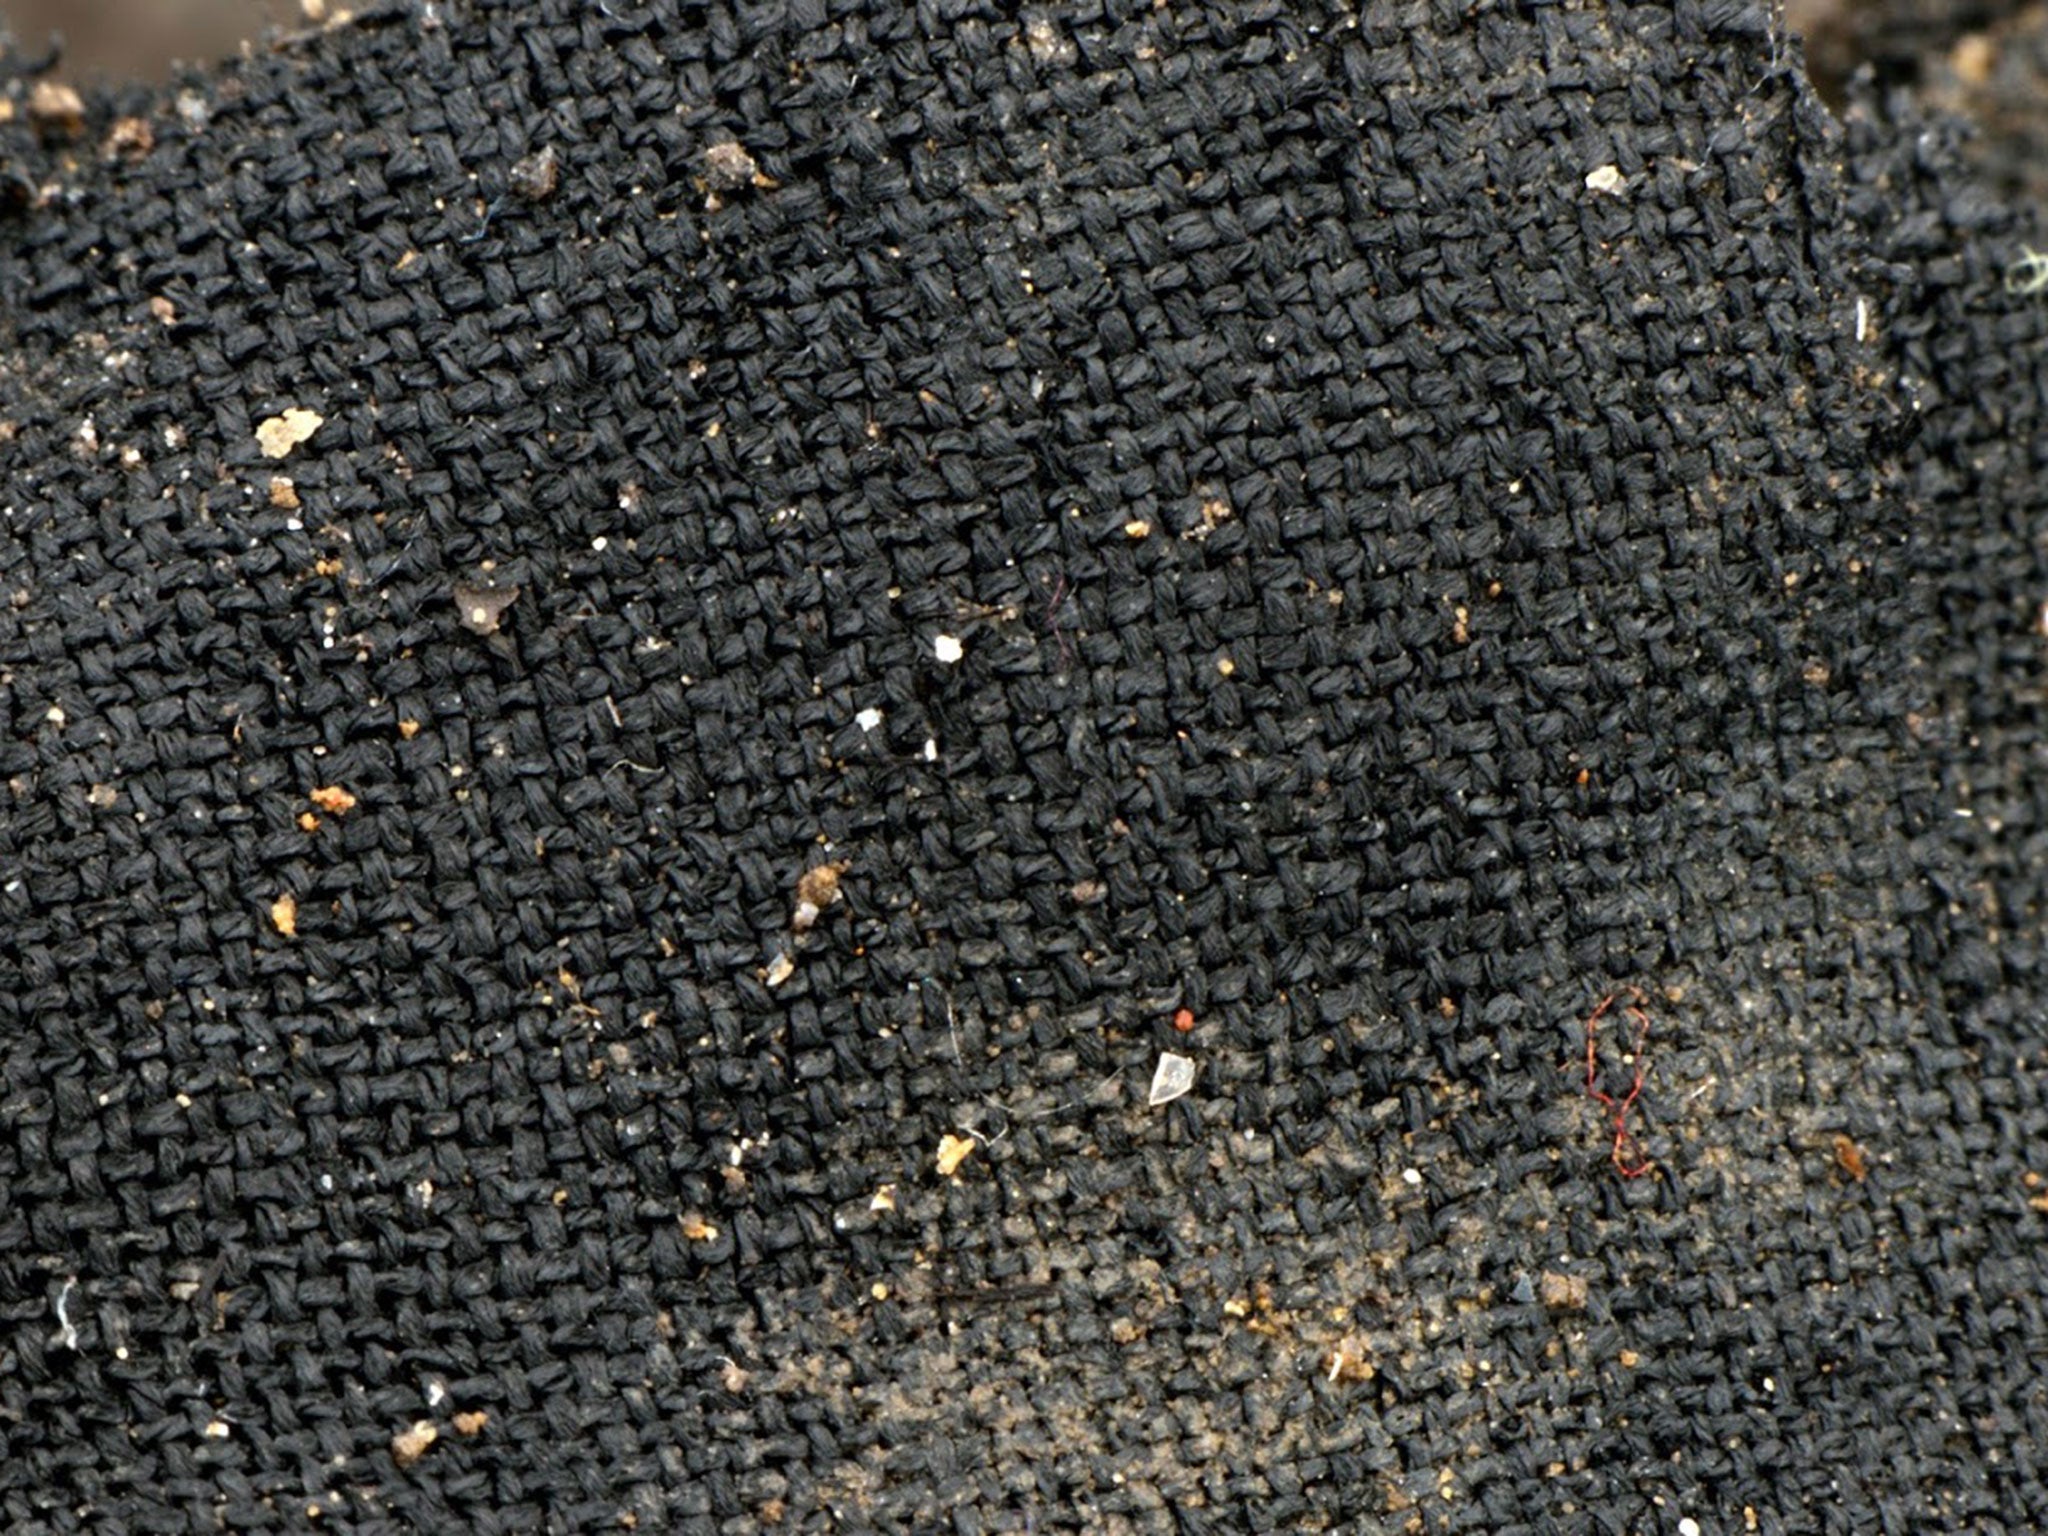 Close-up of finely wooven textile made from plant fibres. The roundhouses contained Europe's finest collection of fabrics and fibres